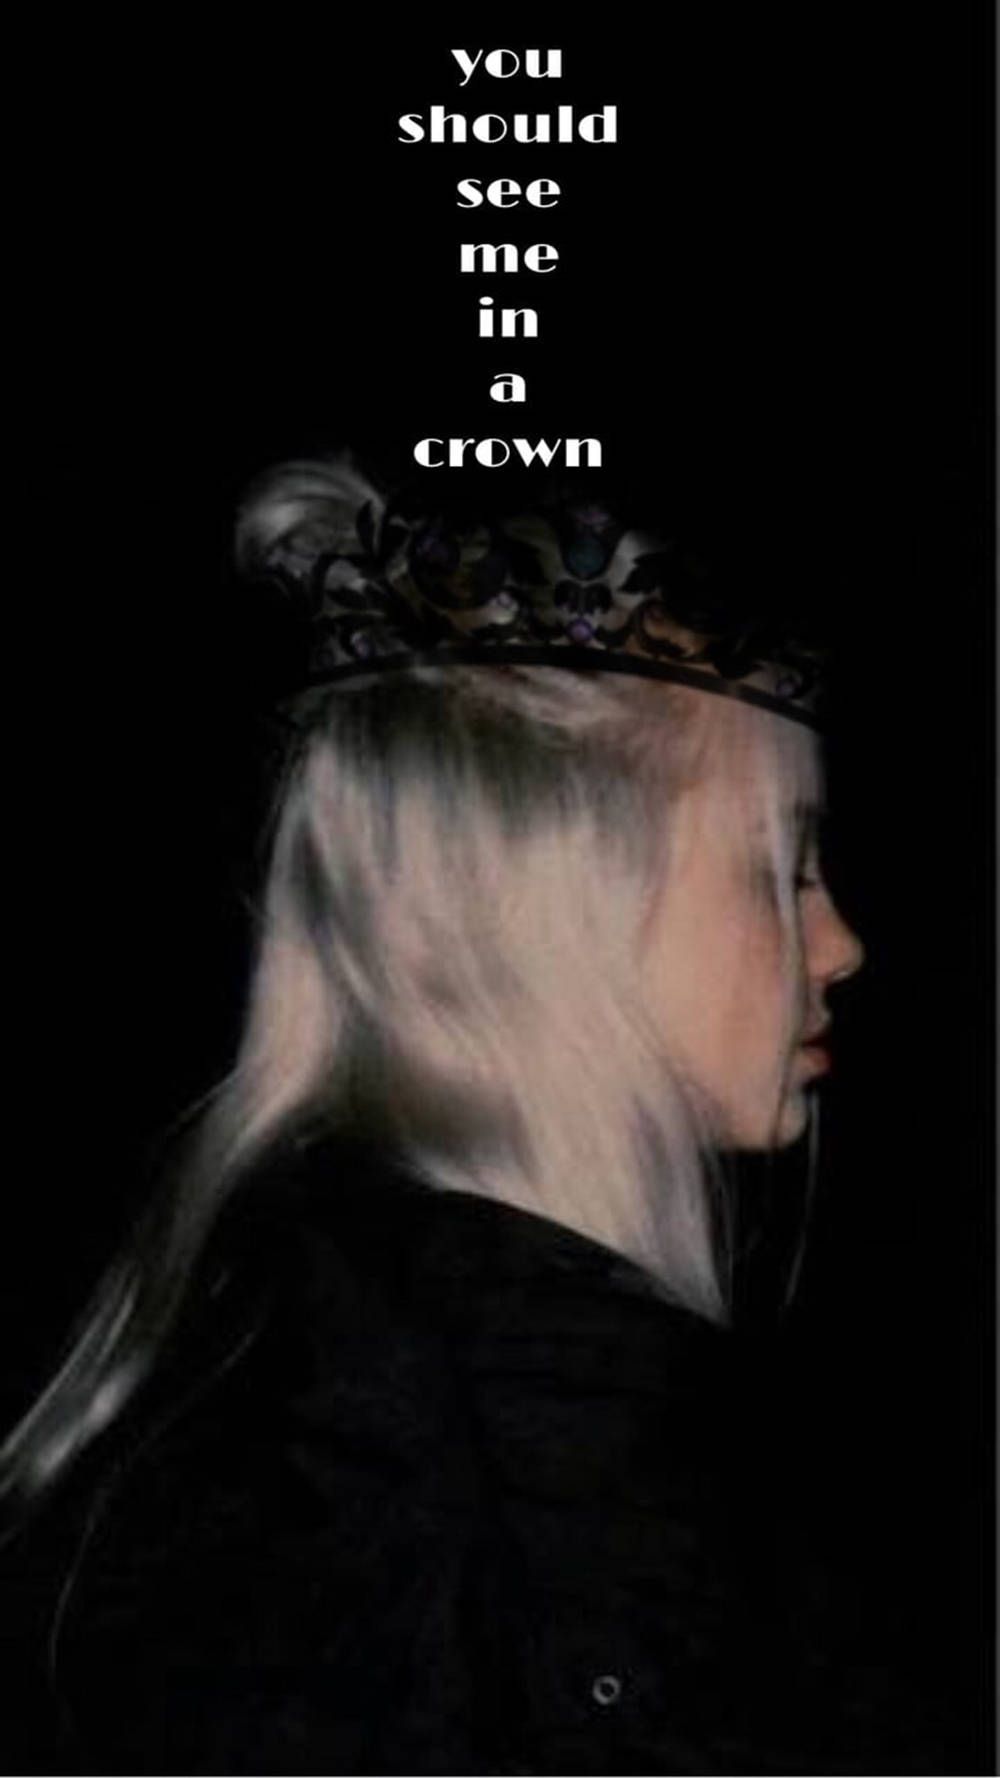 A poster of the girl with long hair and crown - Billie Eilish